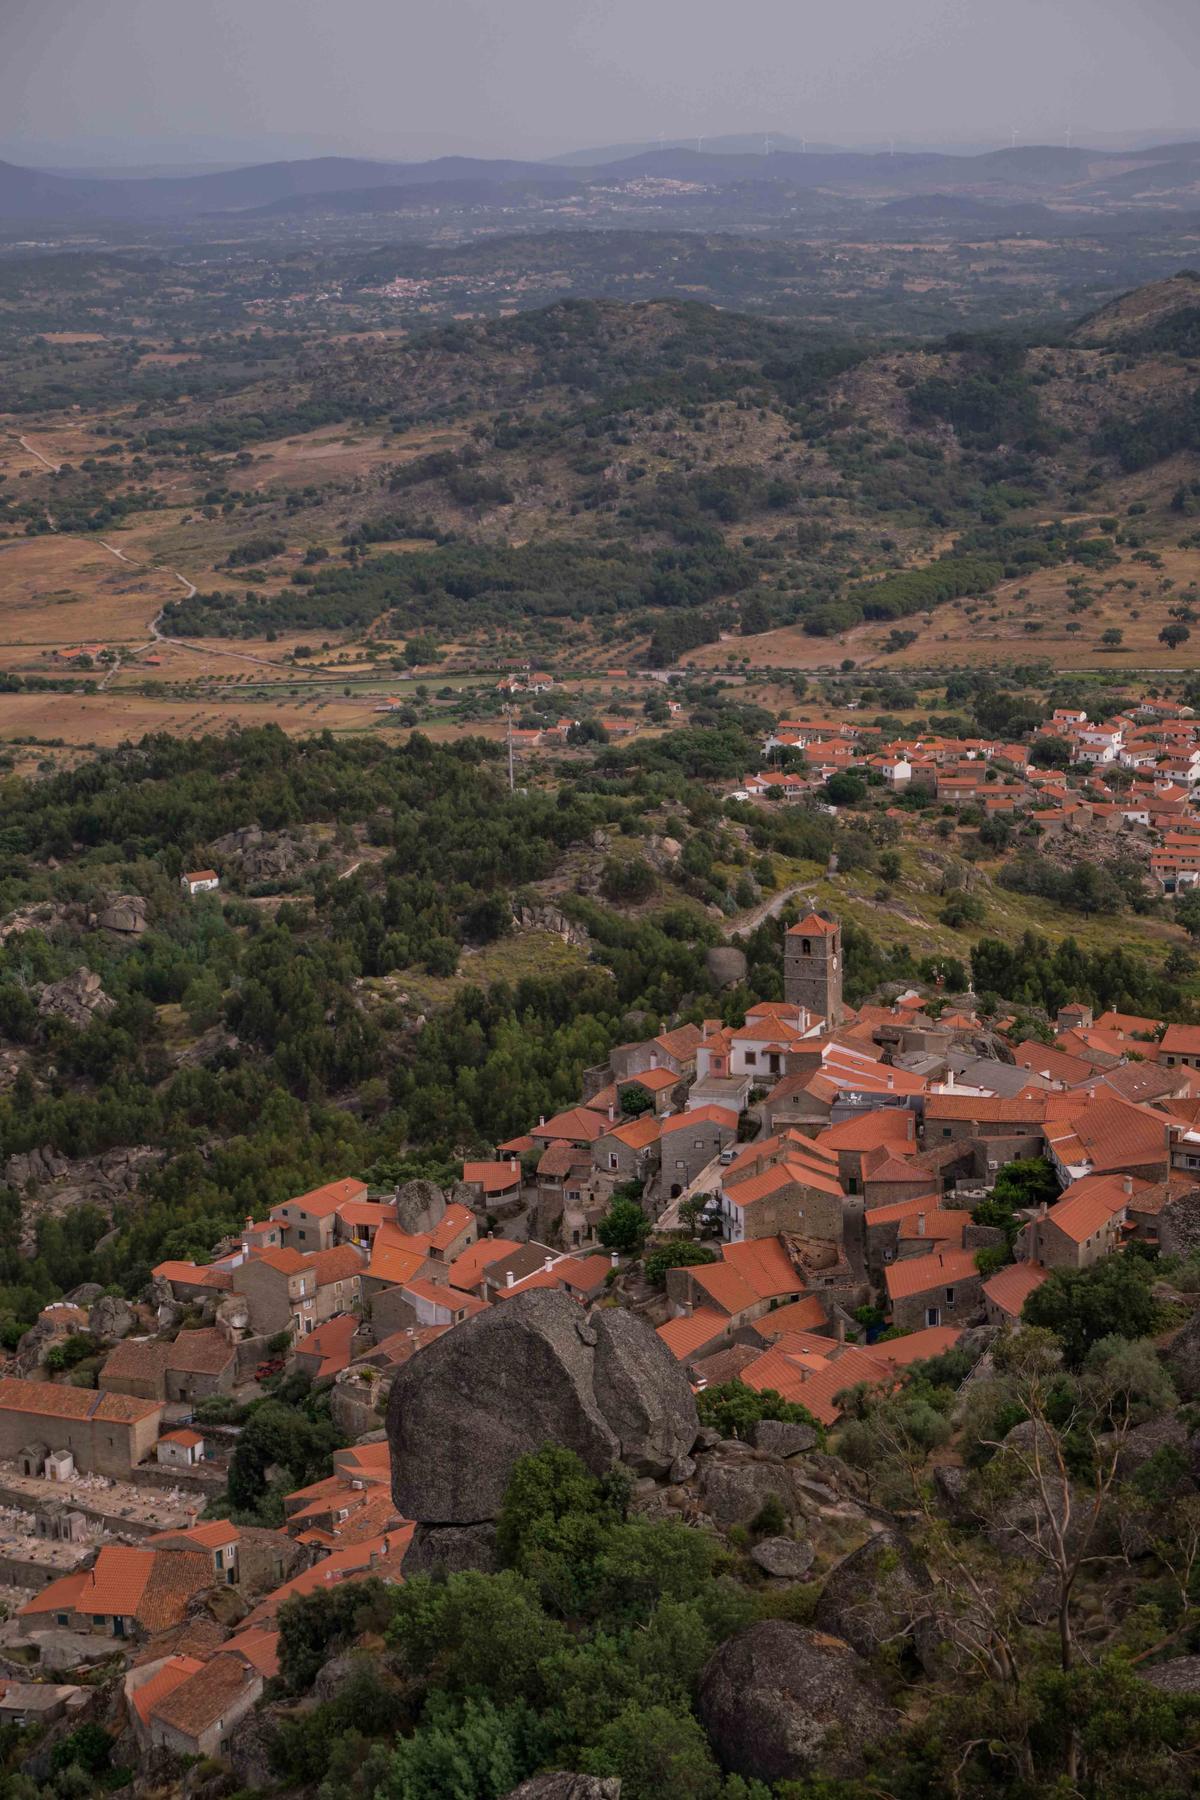 Panorama view of "the most Portuguese town of Portugal," the unique medieval village of Monsanto, Portugal. (nightcap/Shutterstock)